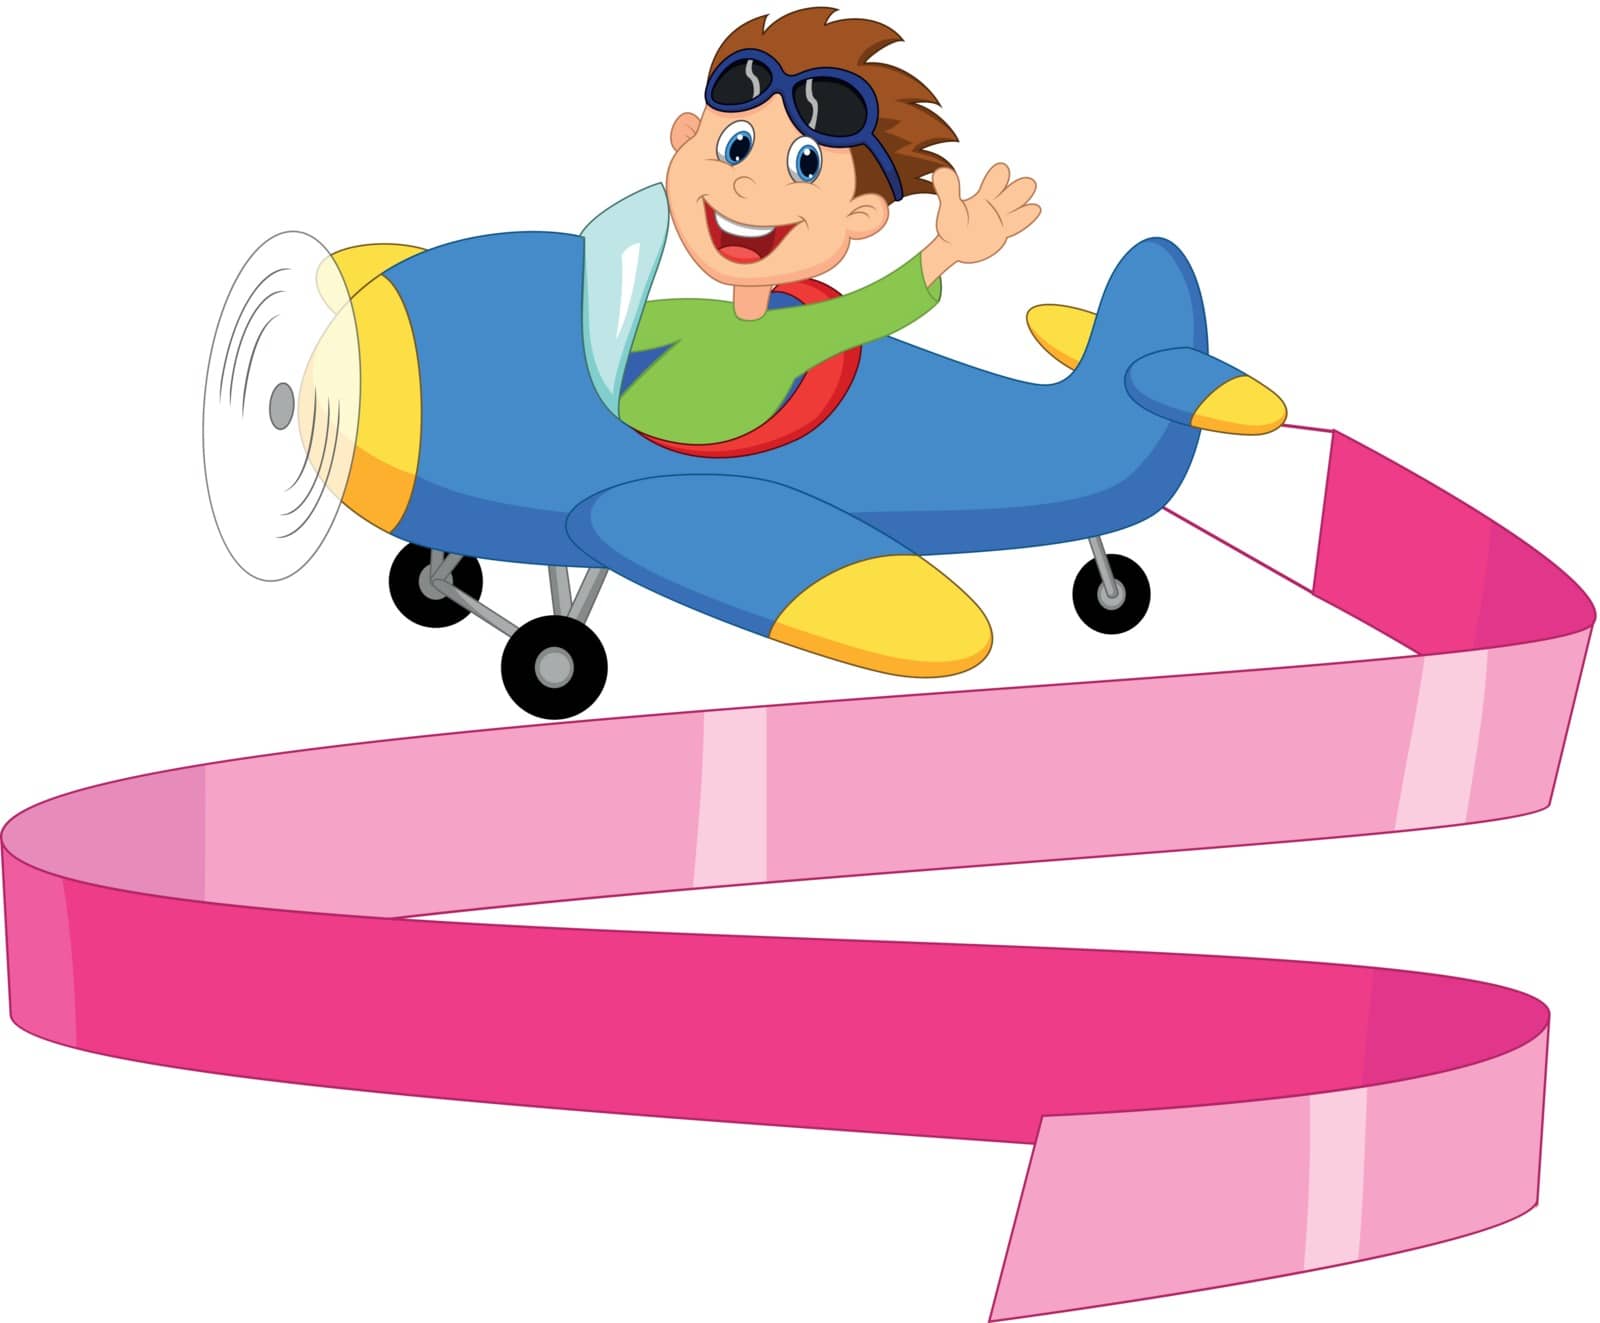 Vector illustration of Little Boy Operating a Plane with blank sign